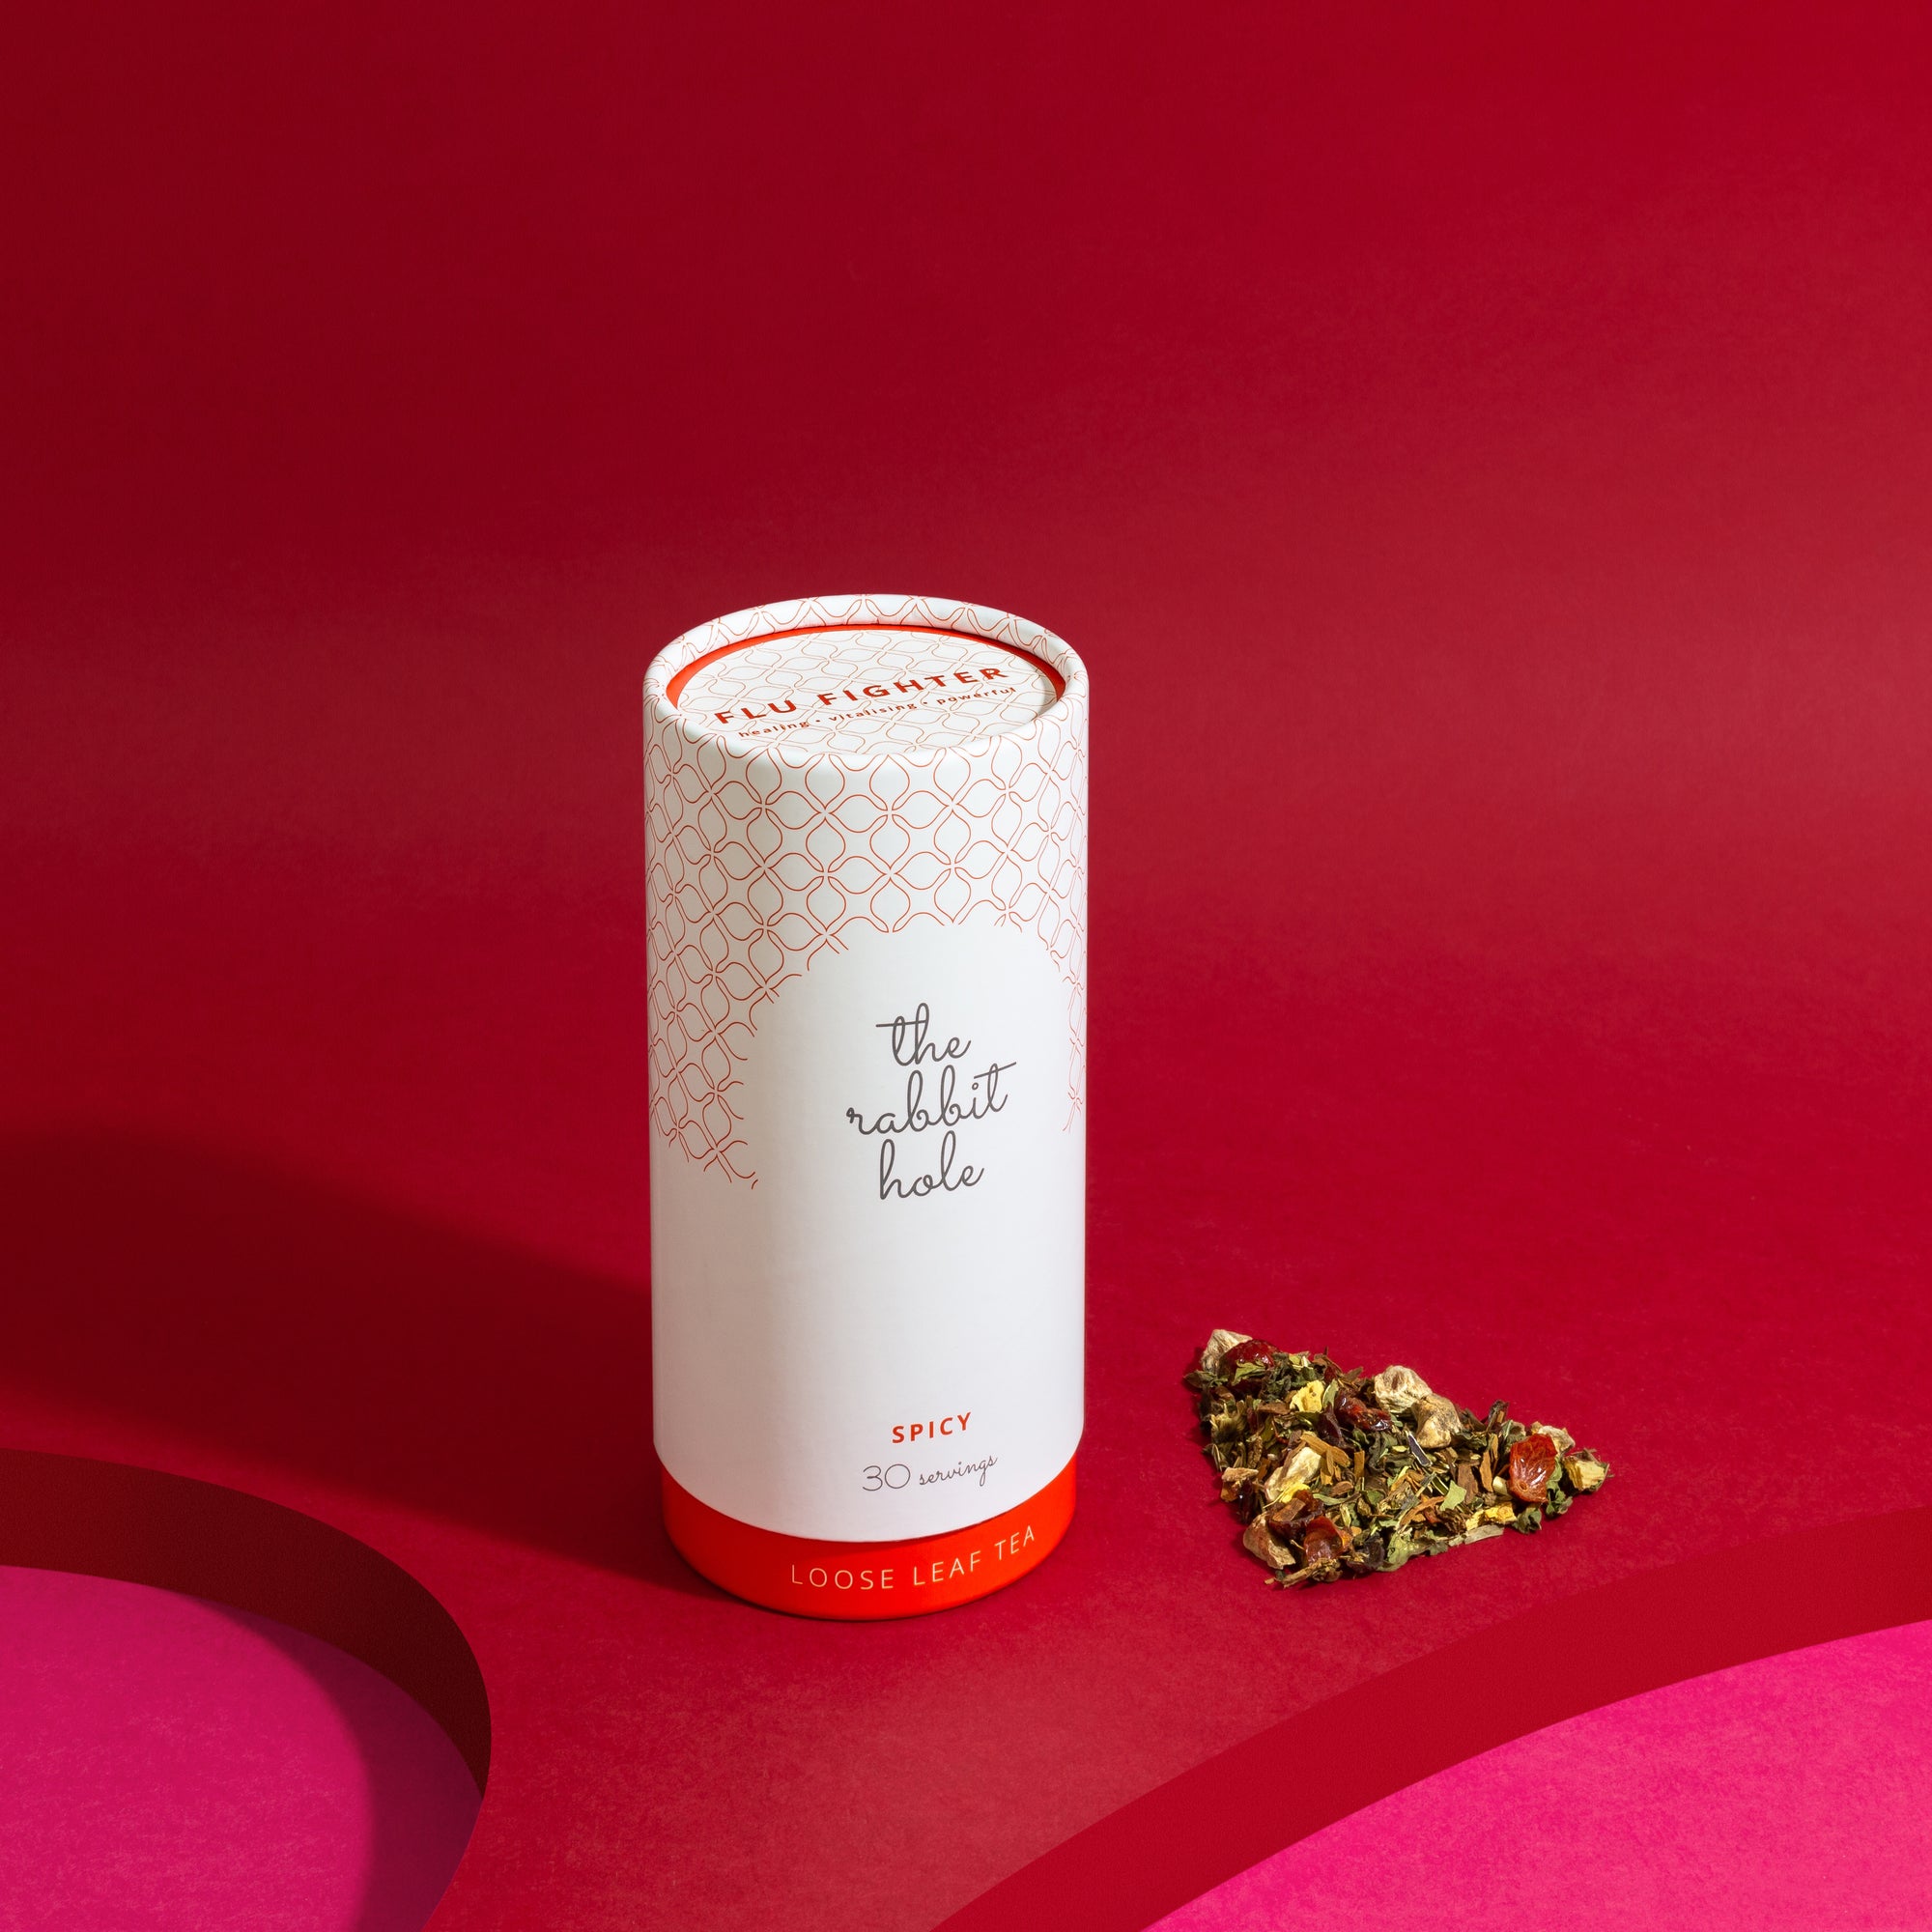 Flu Fighter loose leaf tea by The Rabbit Hole - Australian Made Tea. Tea canister on colourful red background